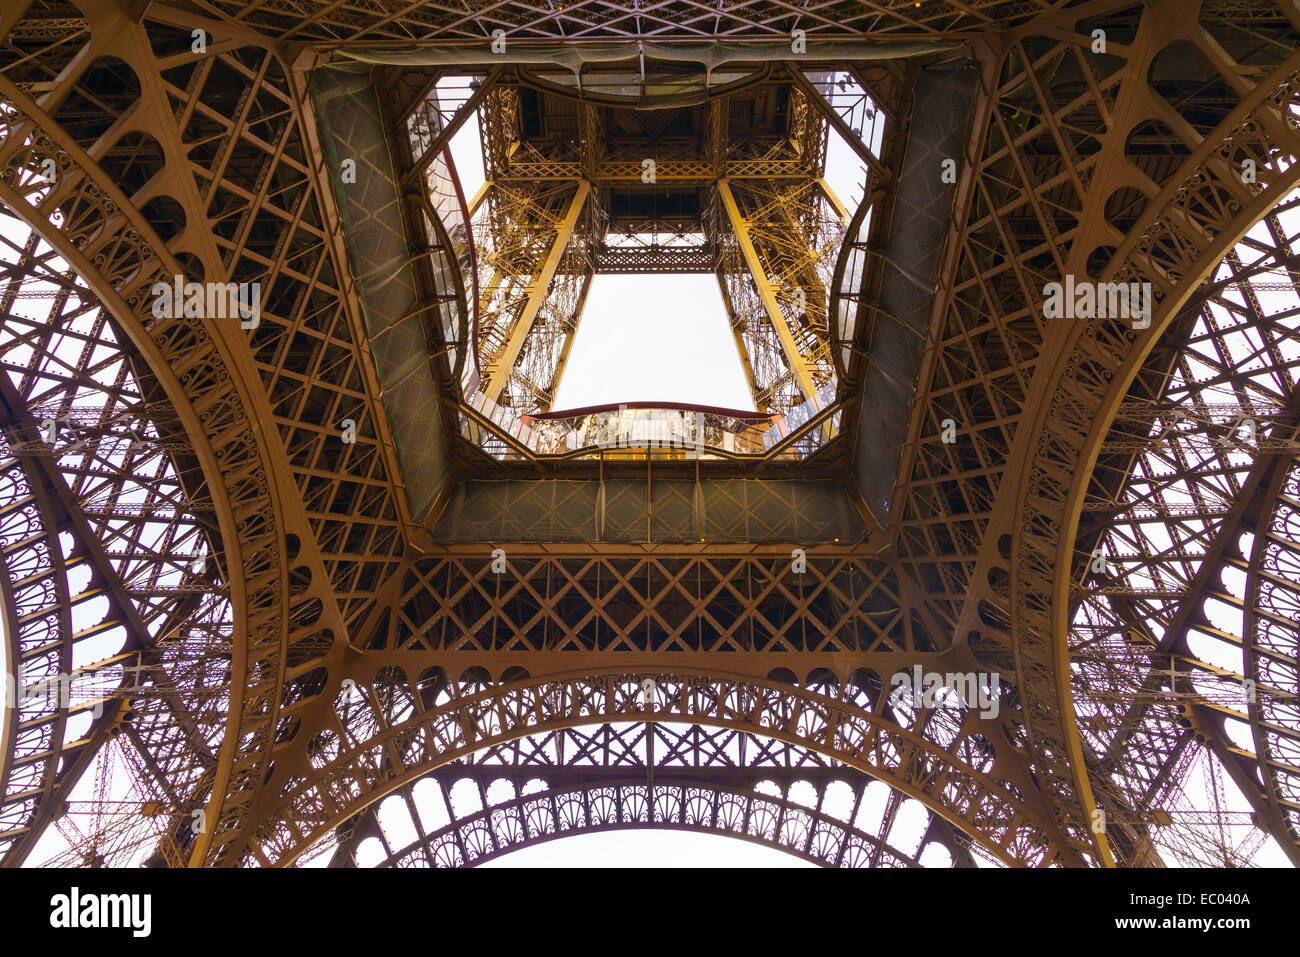 Details of the iron structure of the Eiffel Tower. Paris, France. Stock Photo